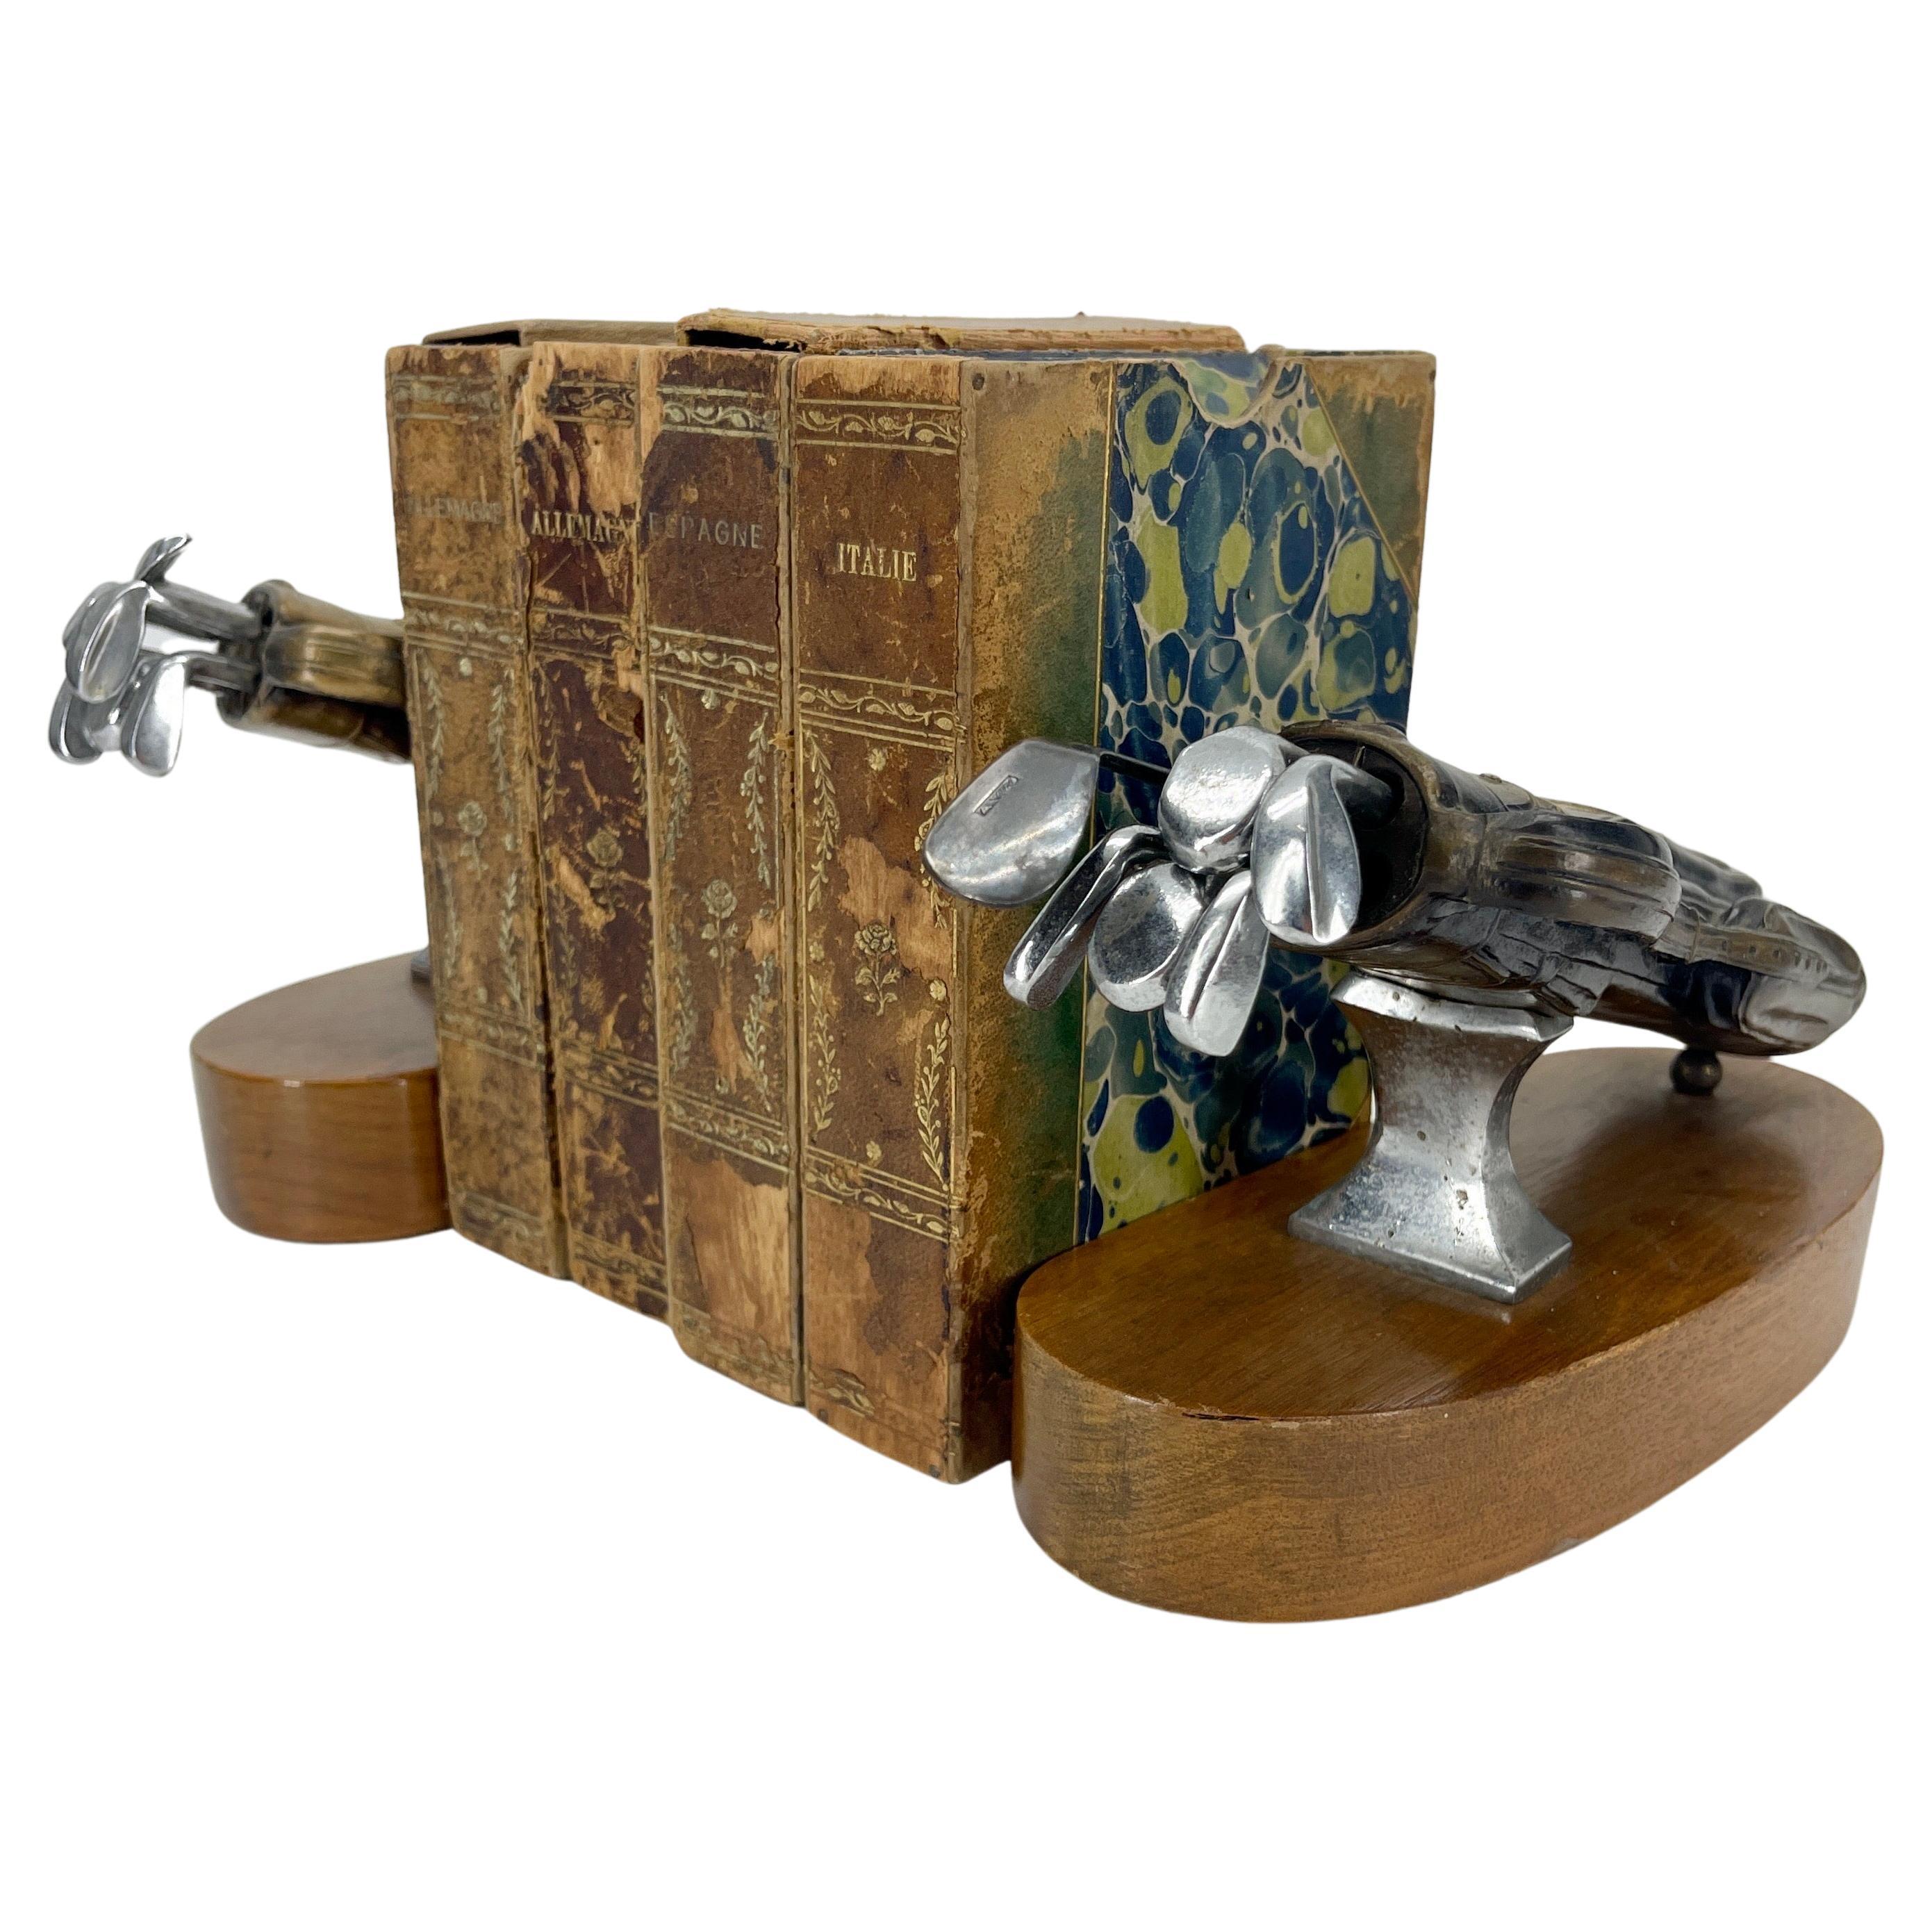 Brass Golf Bag Themed Bookends on wooden stand. 
All the clubs comes out.